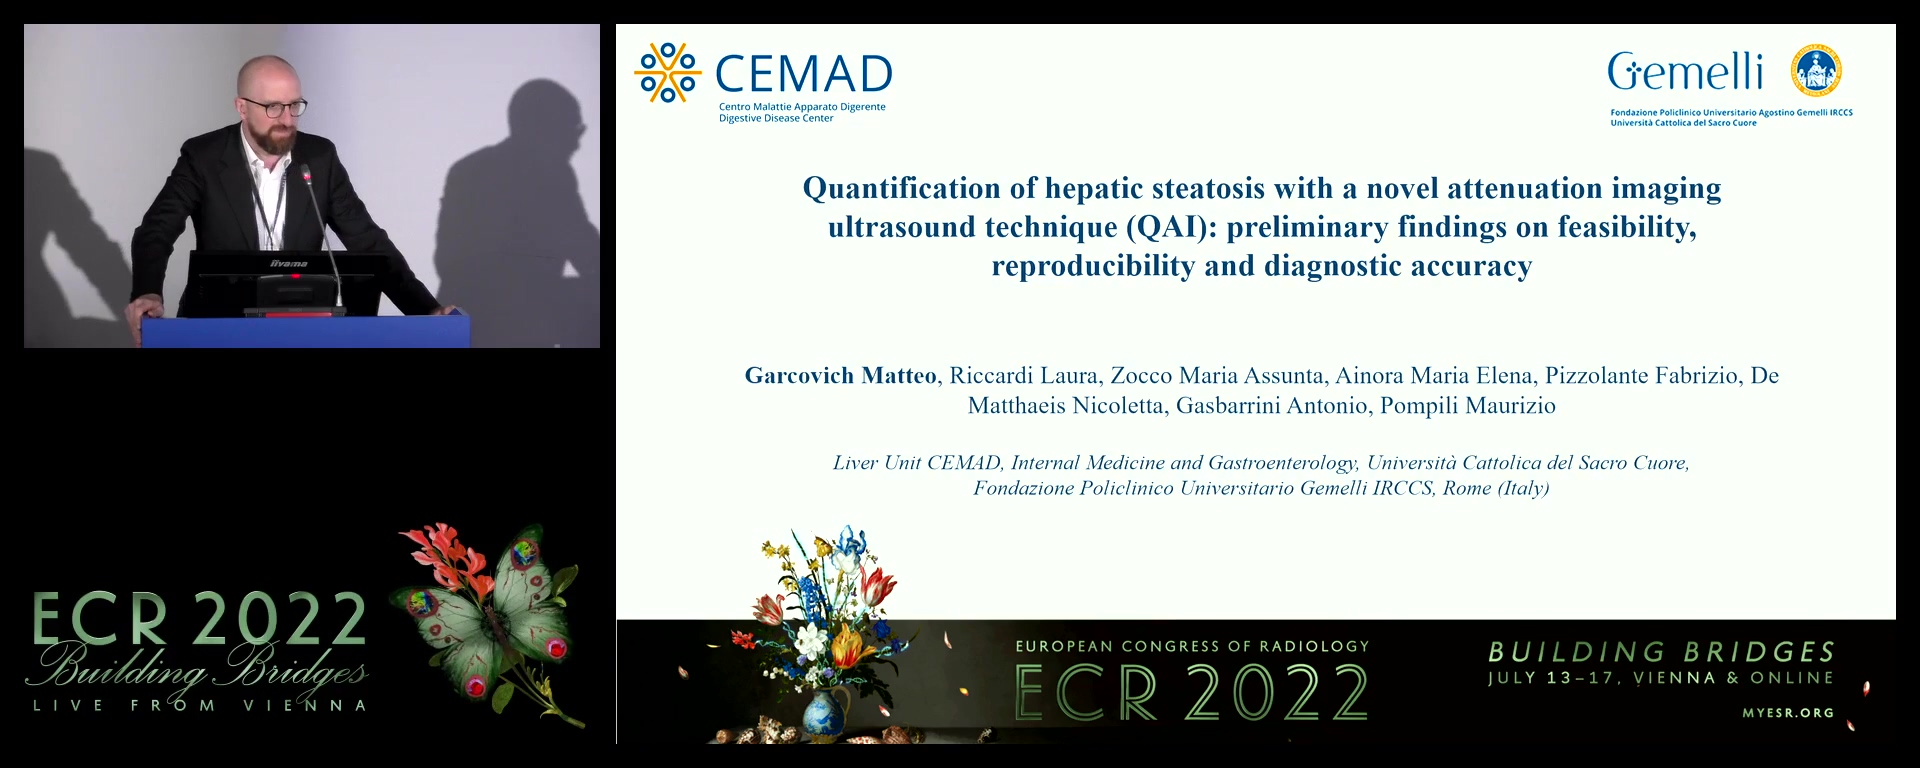 Quantification of hepatic steatosis with a novel attenuation imaging (ATI) ultrasound technique (QAI): preliminary findings on feasibility, reproducibility and diagnostic accuracy - Matteo Garcovich, Rome / IT